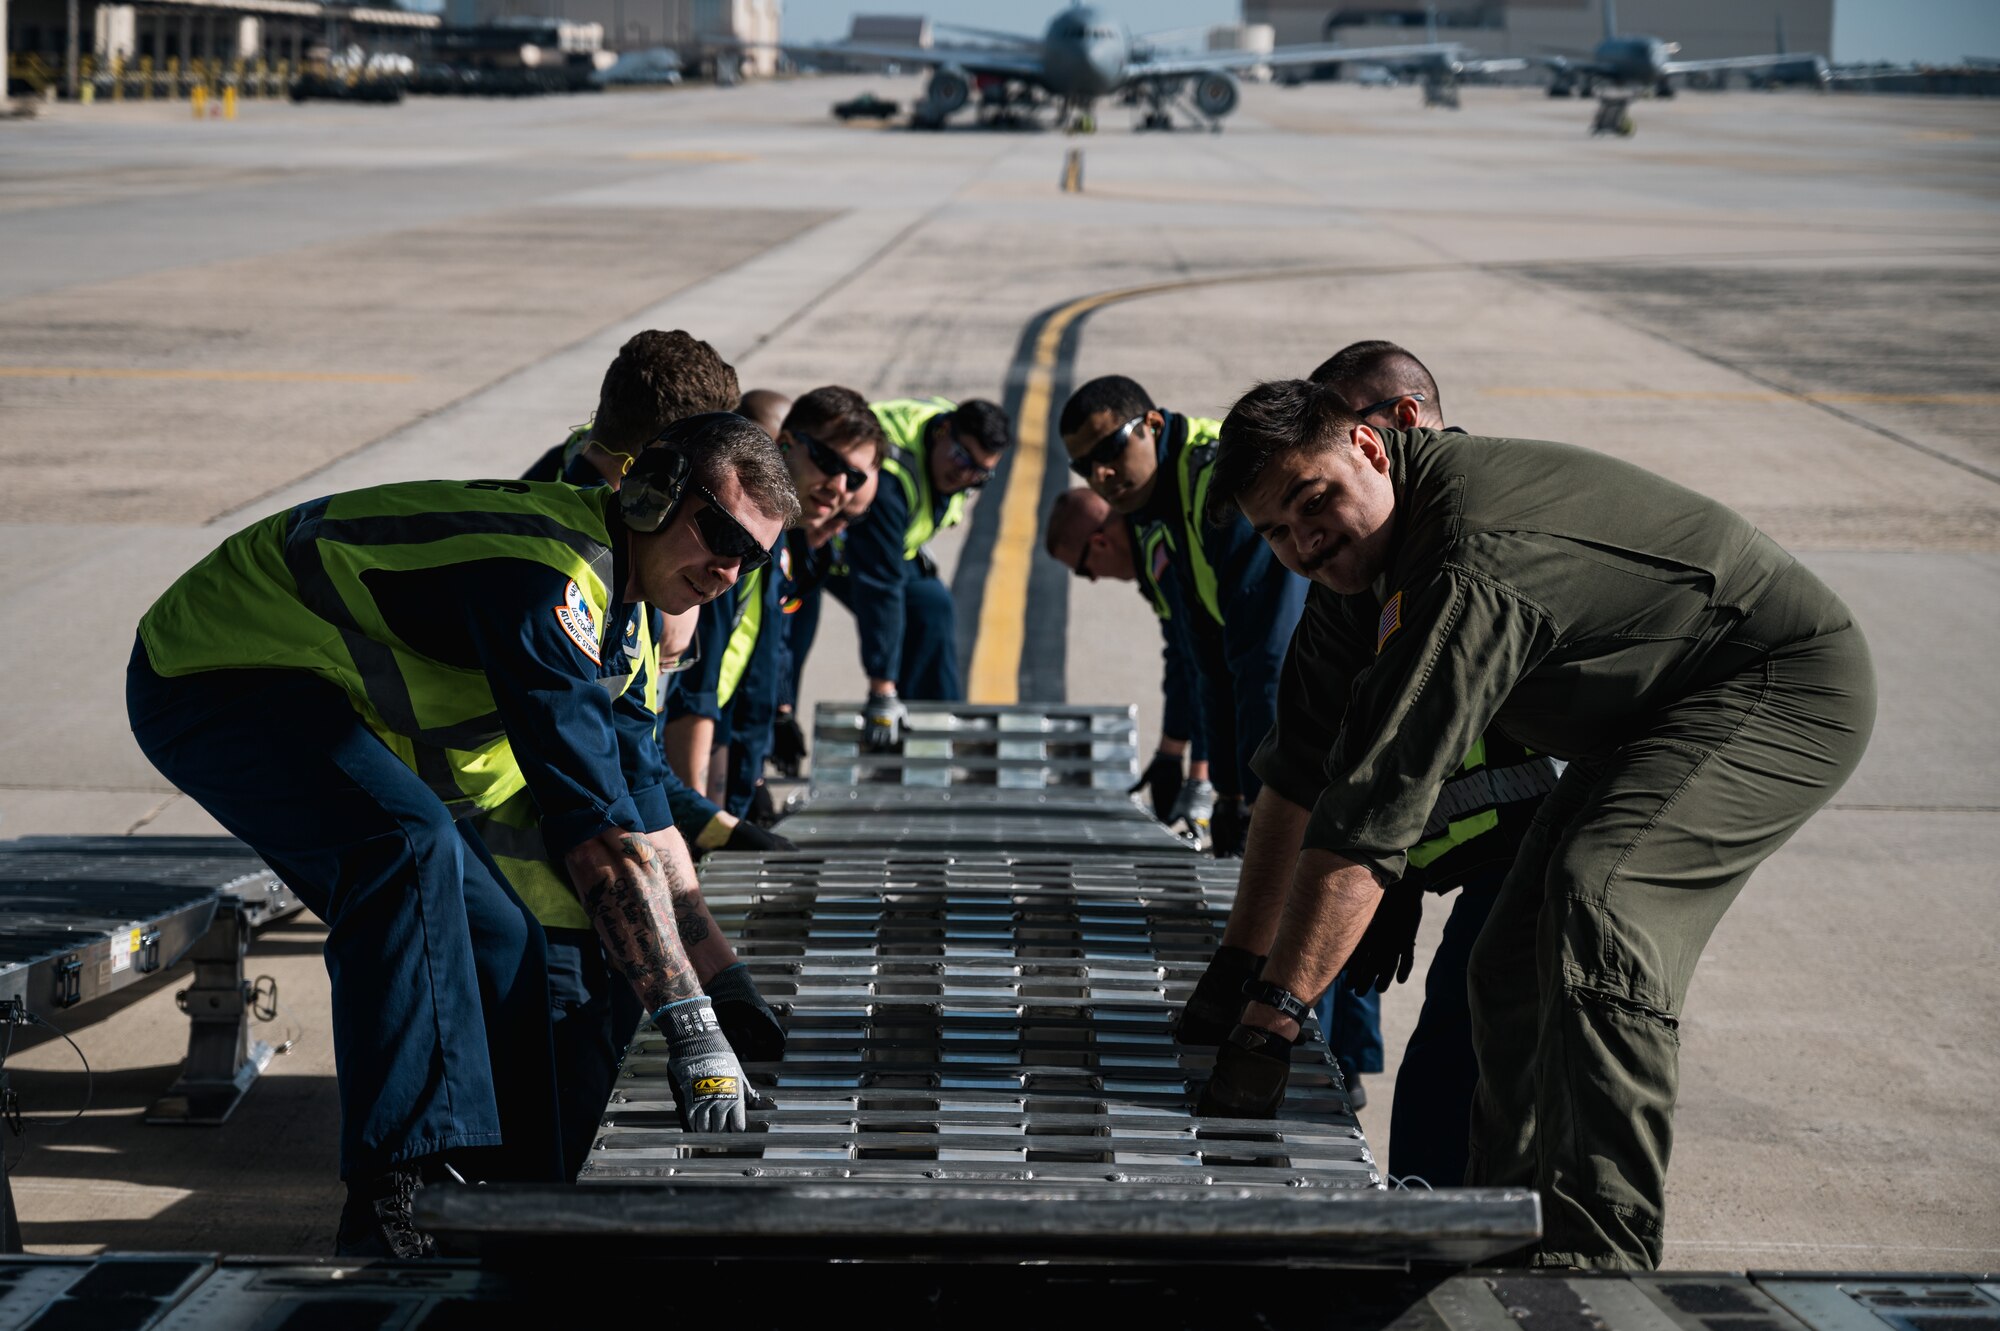 The joint exercise included the loading and offloading of equipment and vehicles onto a C-17, as well as various inspections and documentation. Exercises like these are made possible by the leveraging of assets of Joint Force partners across the Department of Defense’s only tri-service base.  (U.S. Air Force photo by Senior Airman Sergio Avalos)